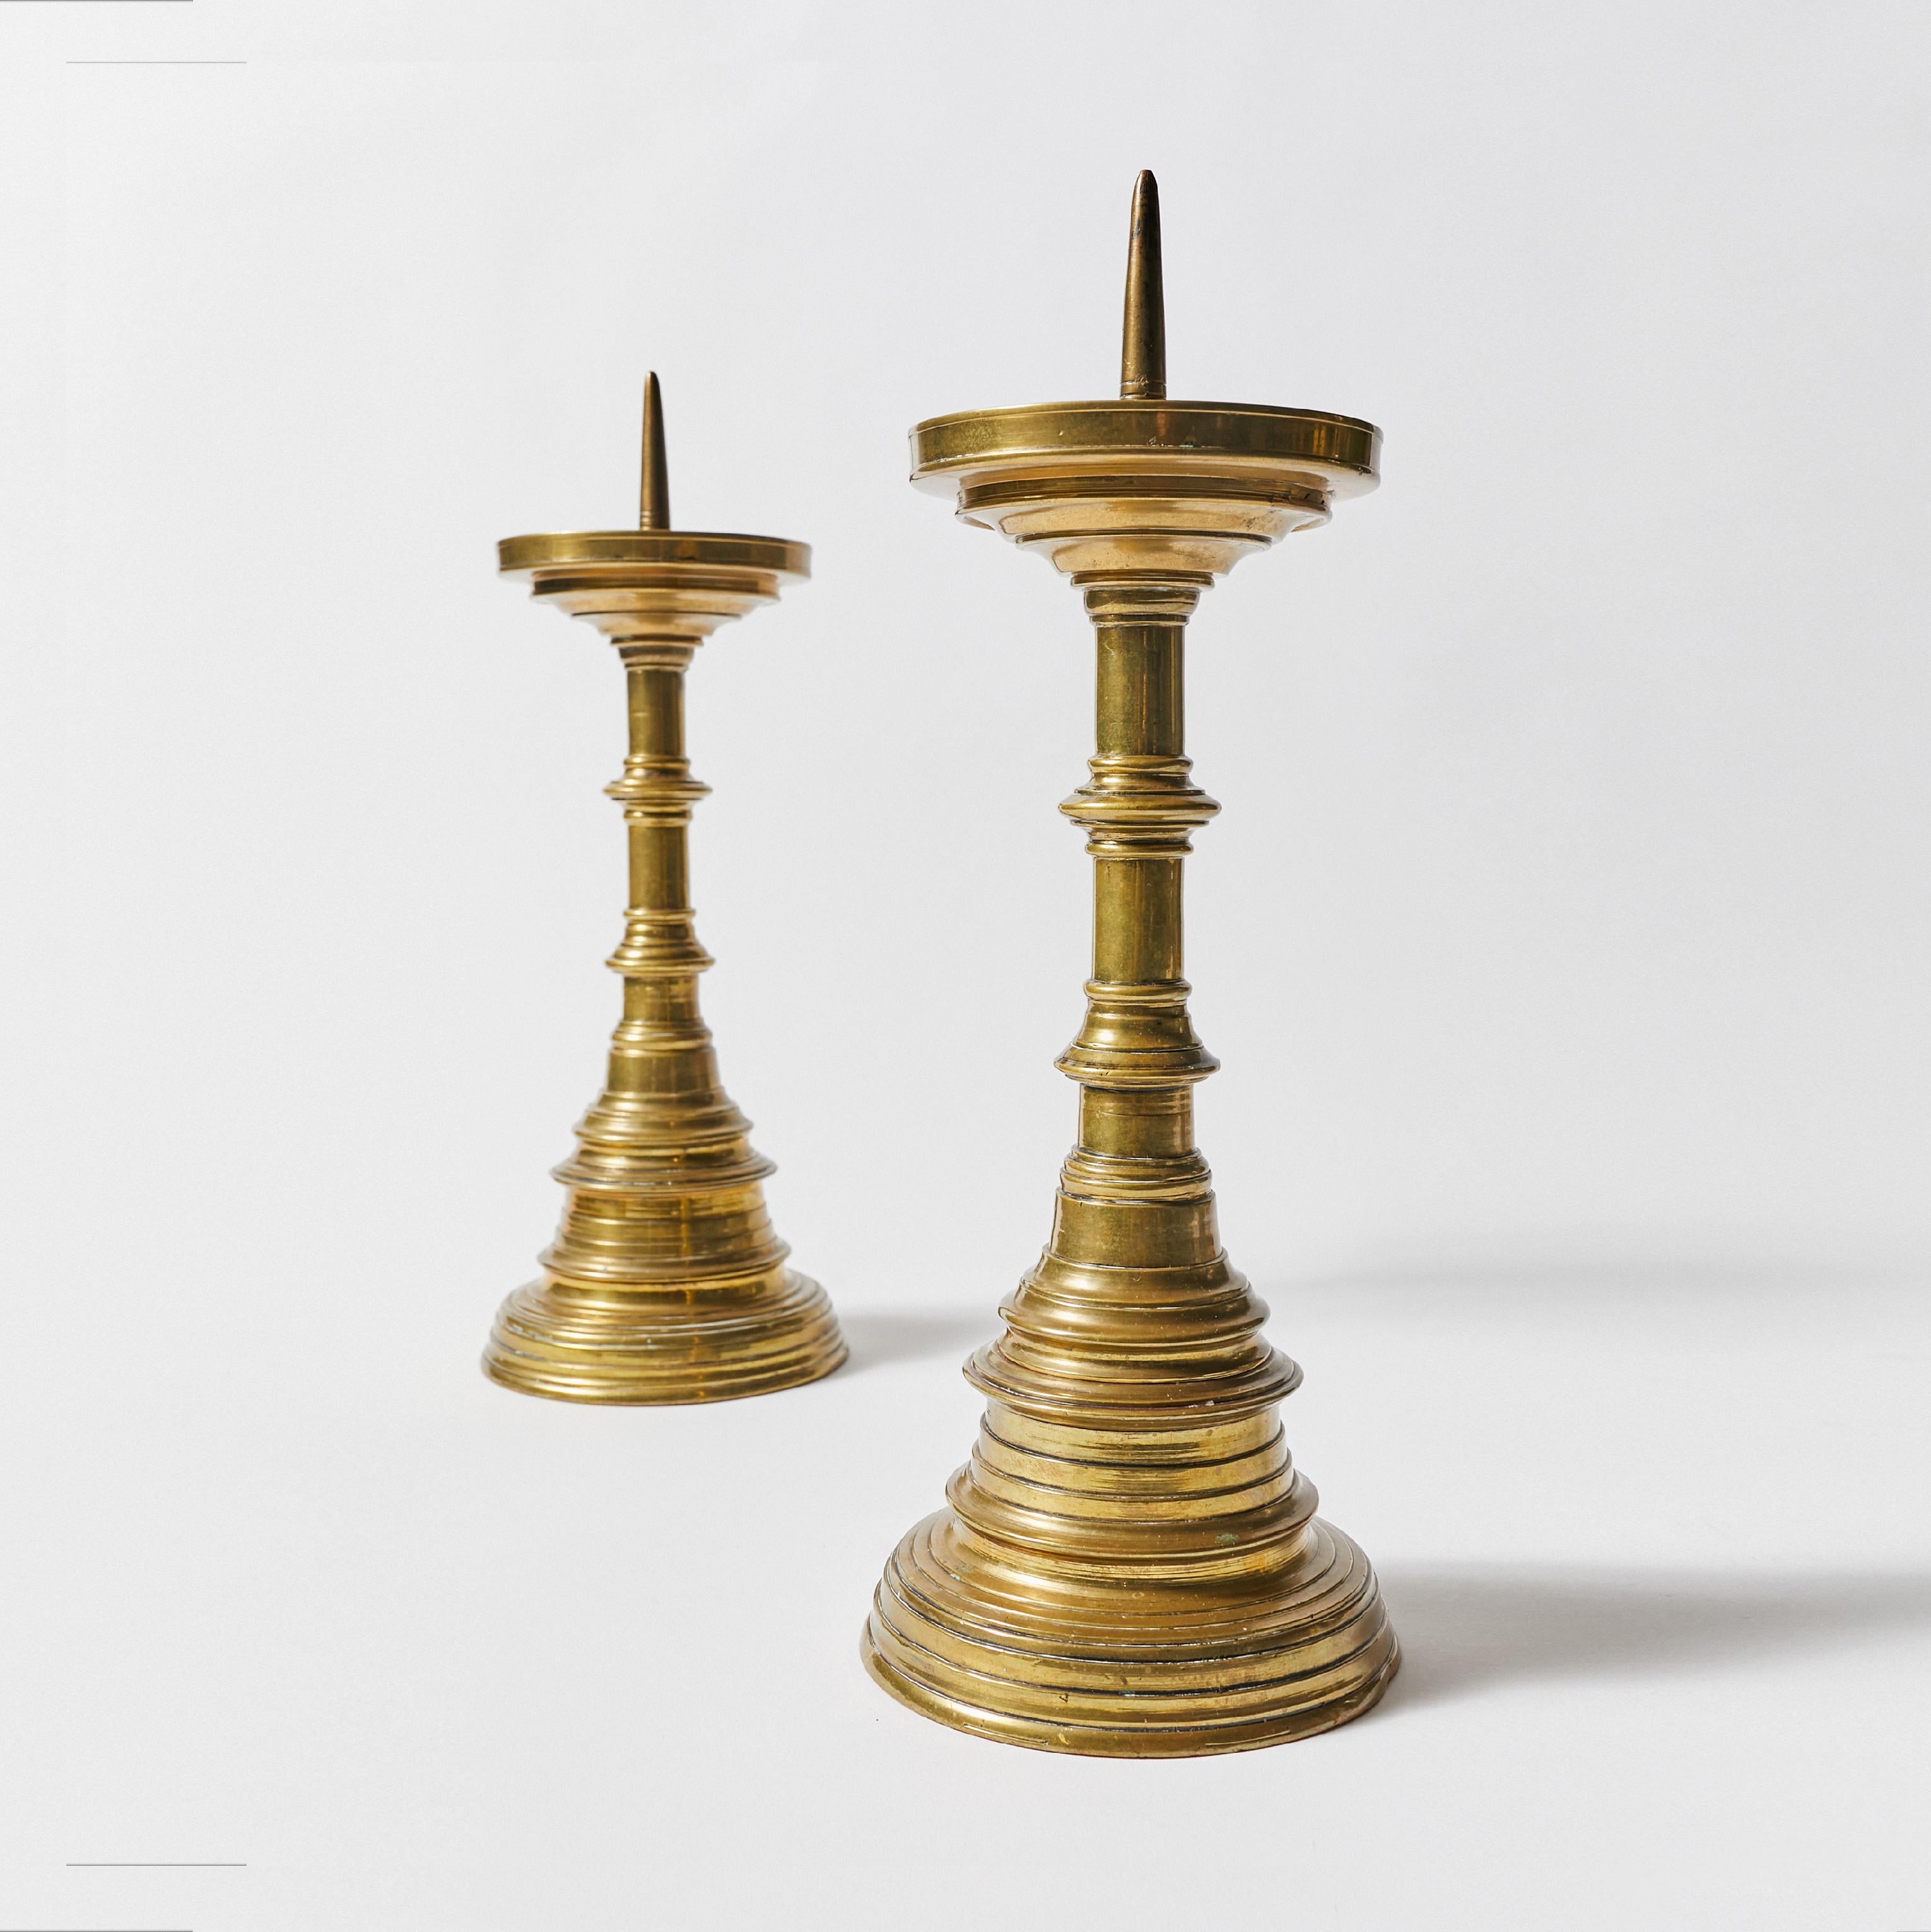 Set of two candle holders in Dutch colonial style. Made in brass with beautiful natural patina.